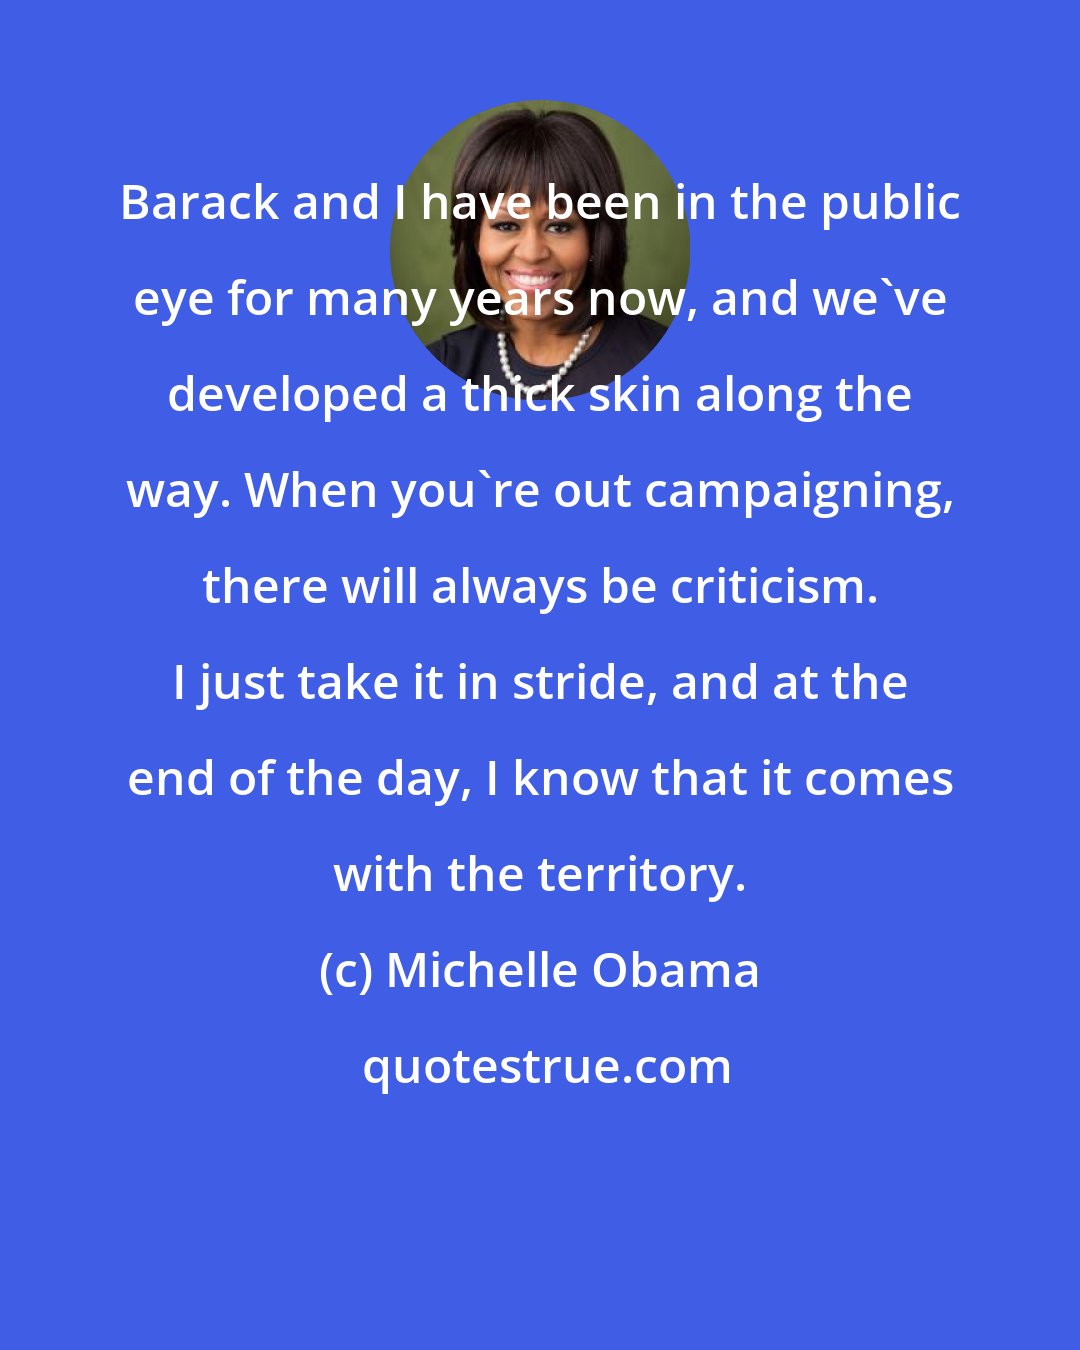 Michelle Obama: Barack and I have been in the public eye for many years now, and we've developed a thick skin along the way. When you're out campaigning, there will always be criticism. I just take it in stride, and at the end of the day, I know that it comes with the territory.